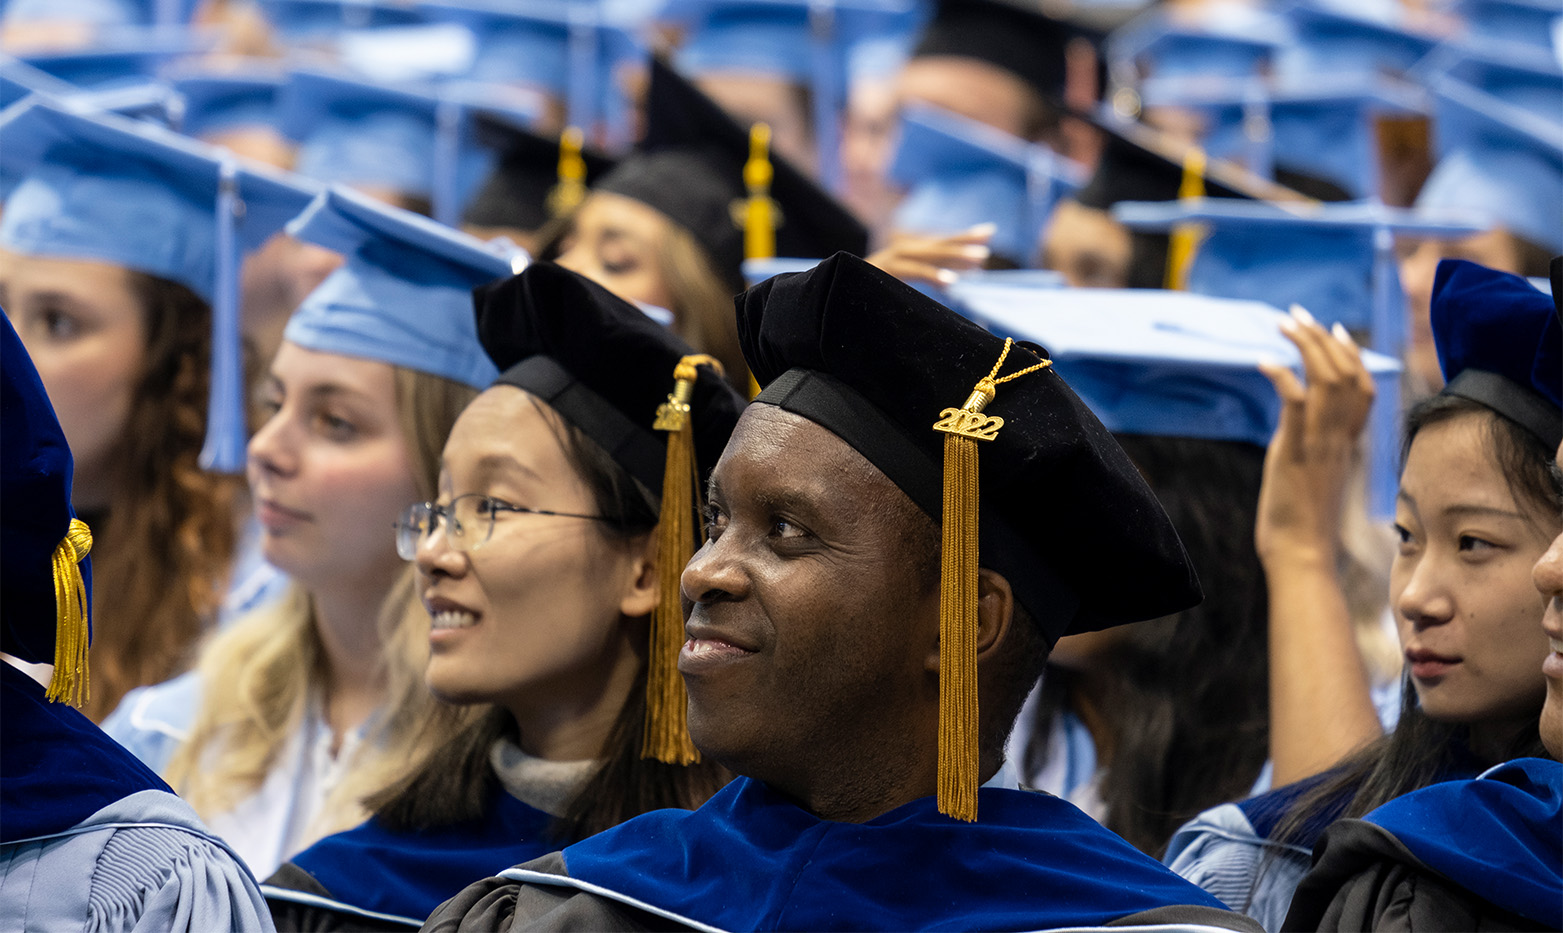 A graduate smiles during the ceremony.